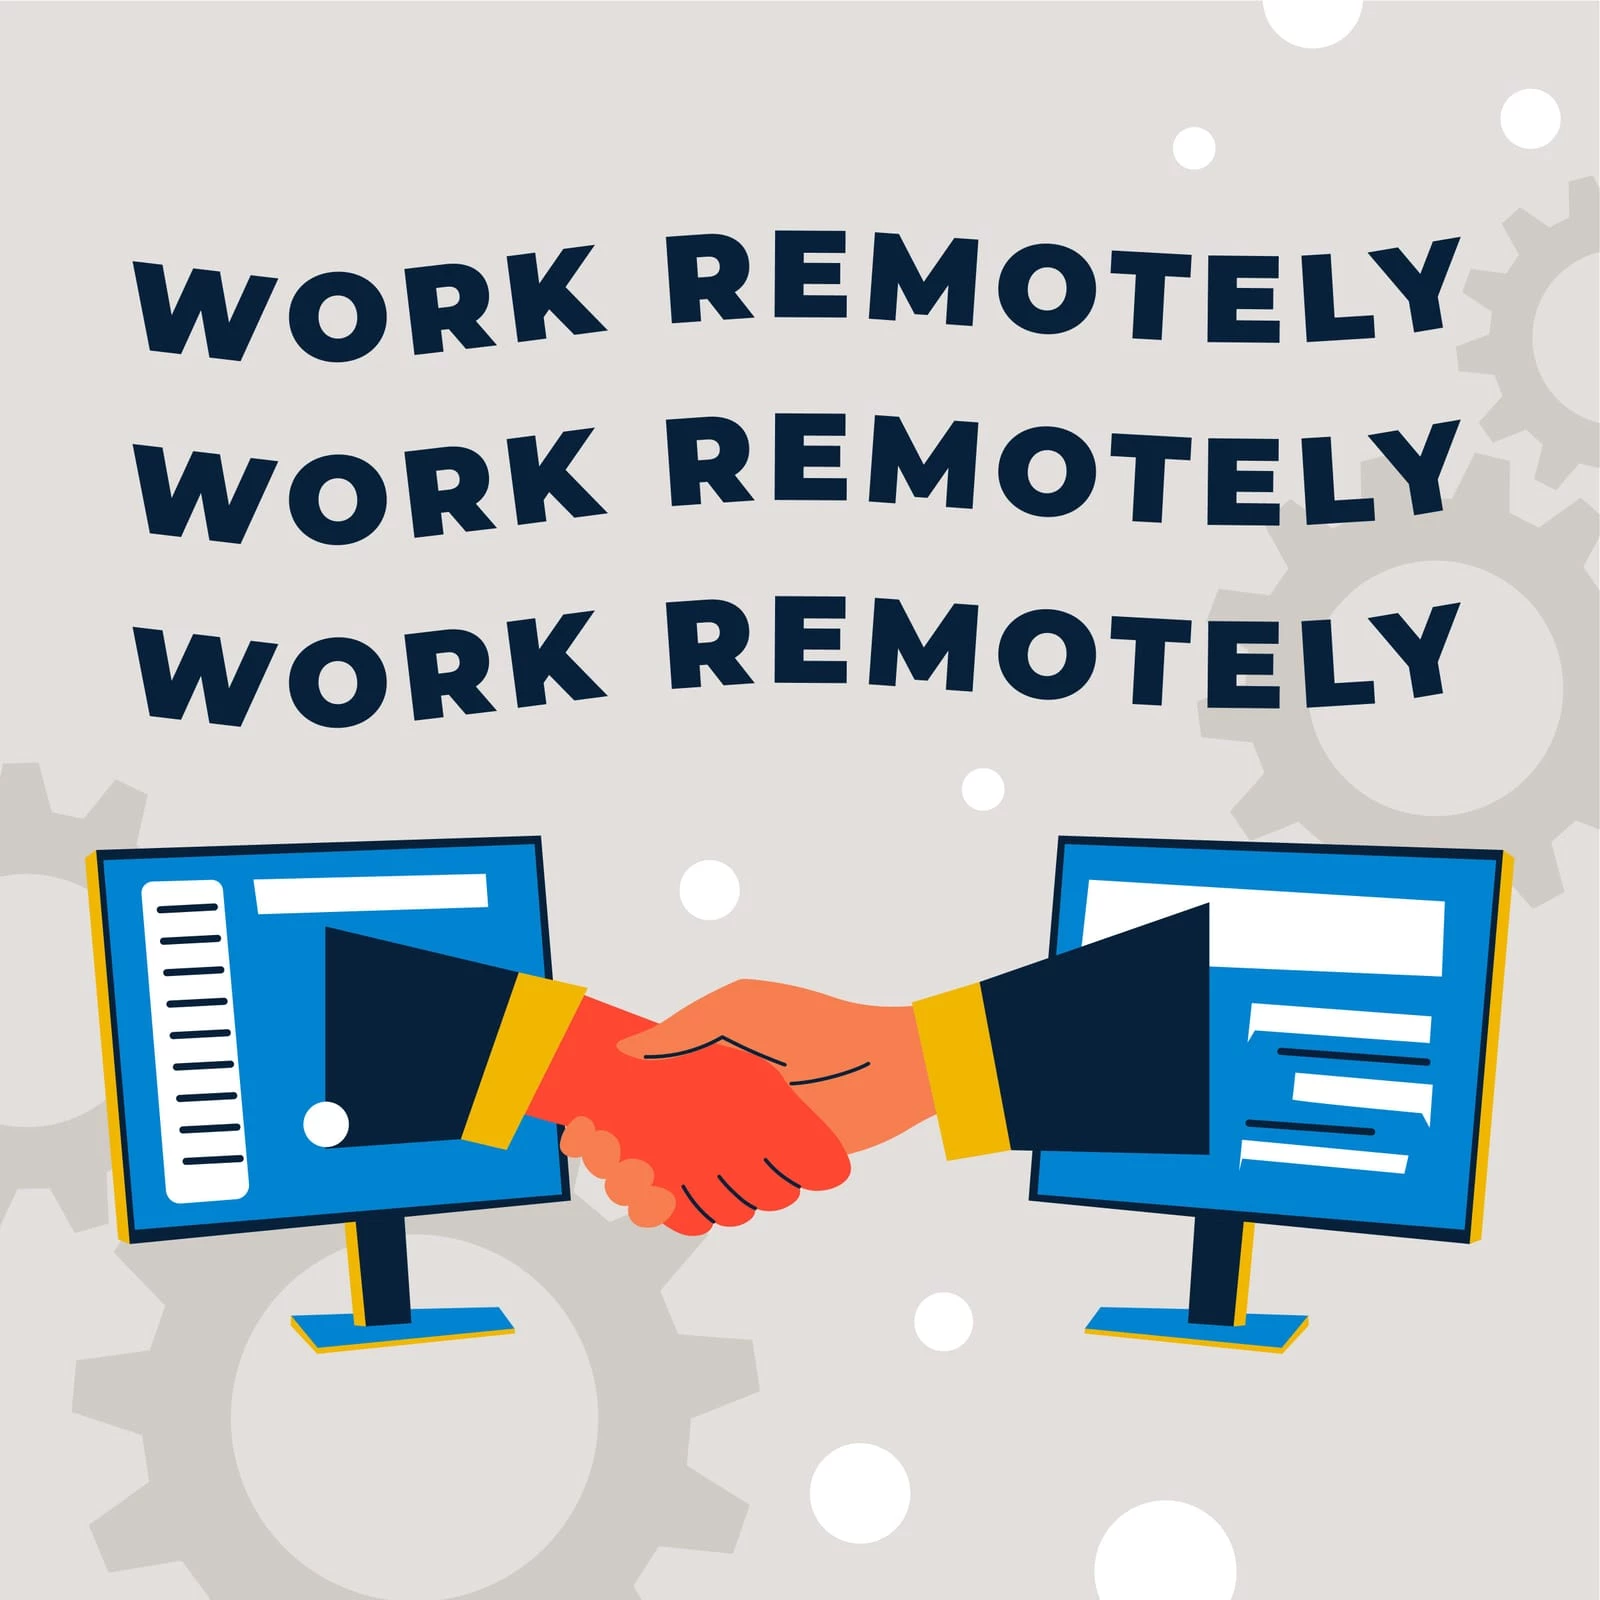 Graphic illustration of two computer monitors shaking hands, with text "work remotely" repeated in the background, symbolizing remote collaboration.